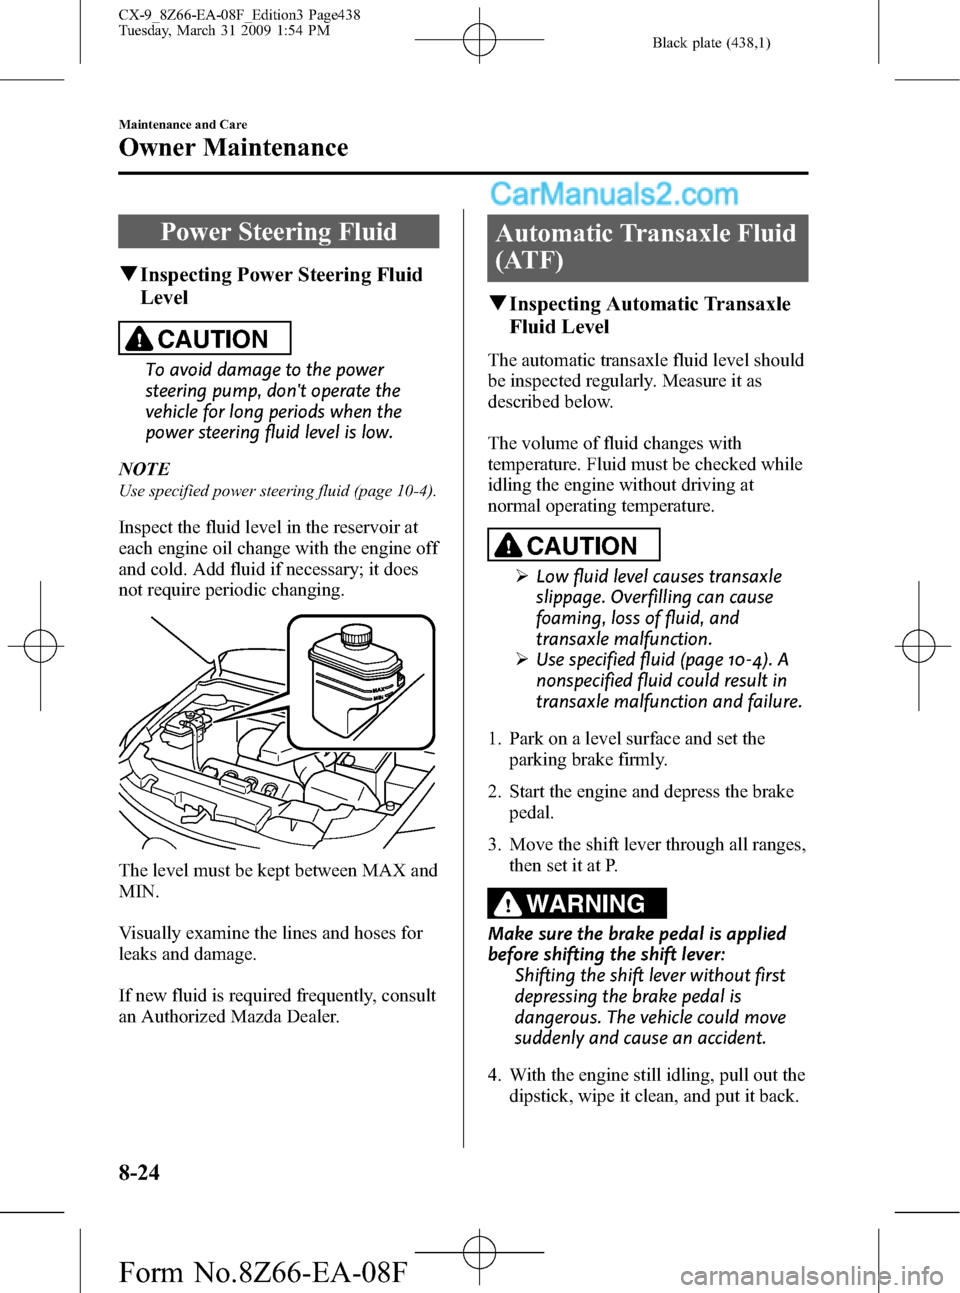 MAZDA MODEL CX-9 2009  Owners Manual (in English) Black plate (438,1)
Power Steering Fluid
qInspecting Power Steering Fluid
Level
CAUTION
To avoid damage to the power
steering pump, dont operate the
vehicle for long periods when the
power steering f